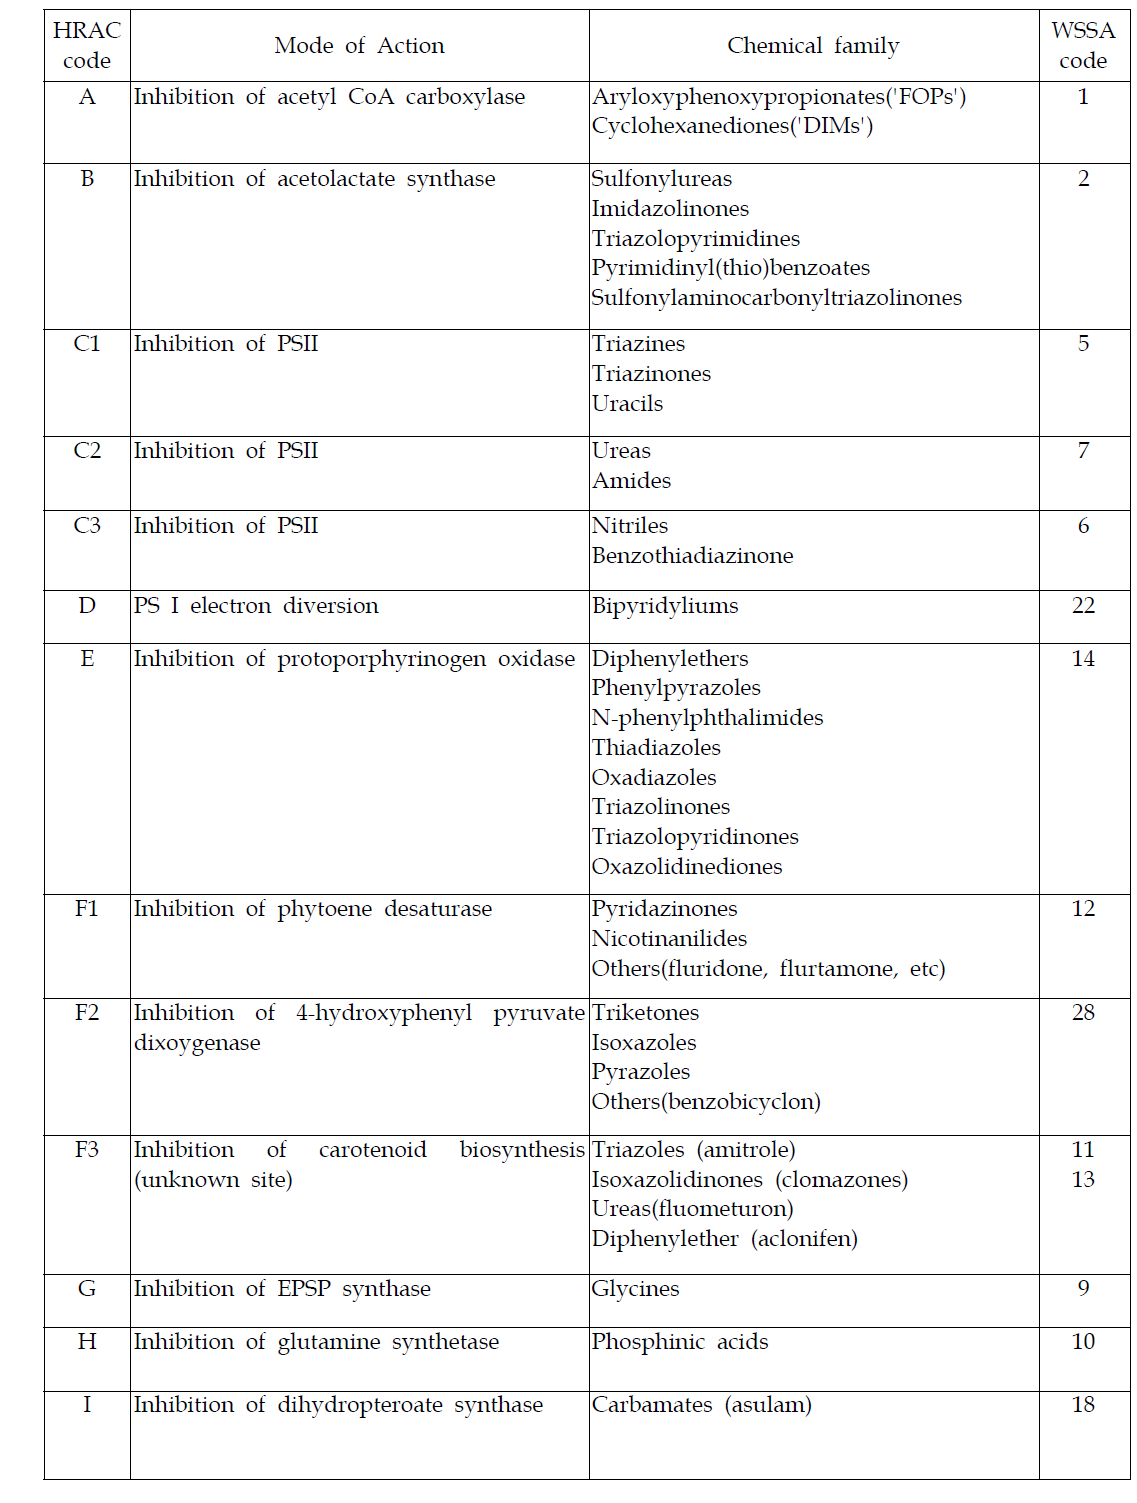 Classification of herbicides according to mode of action